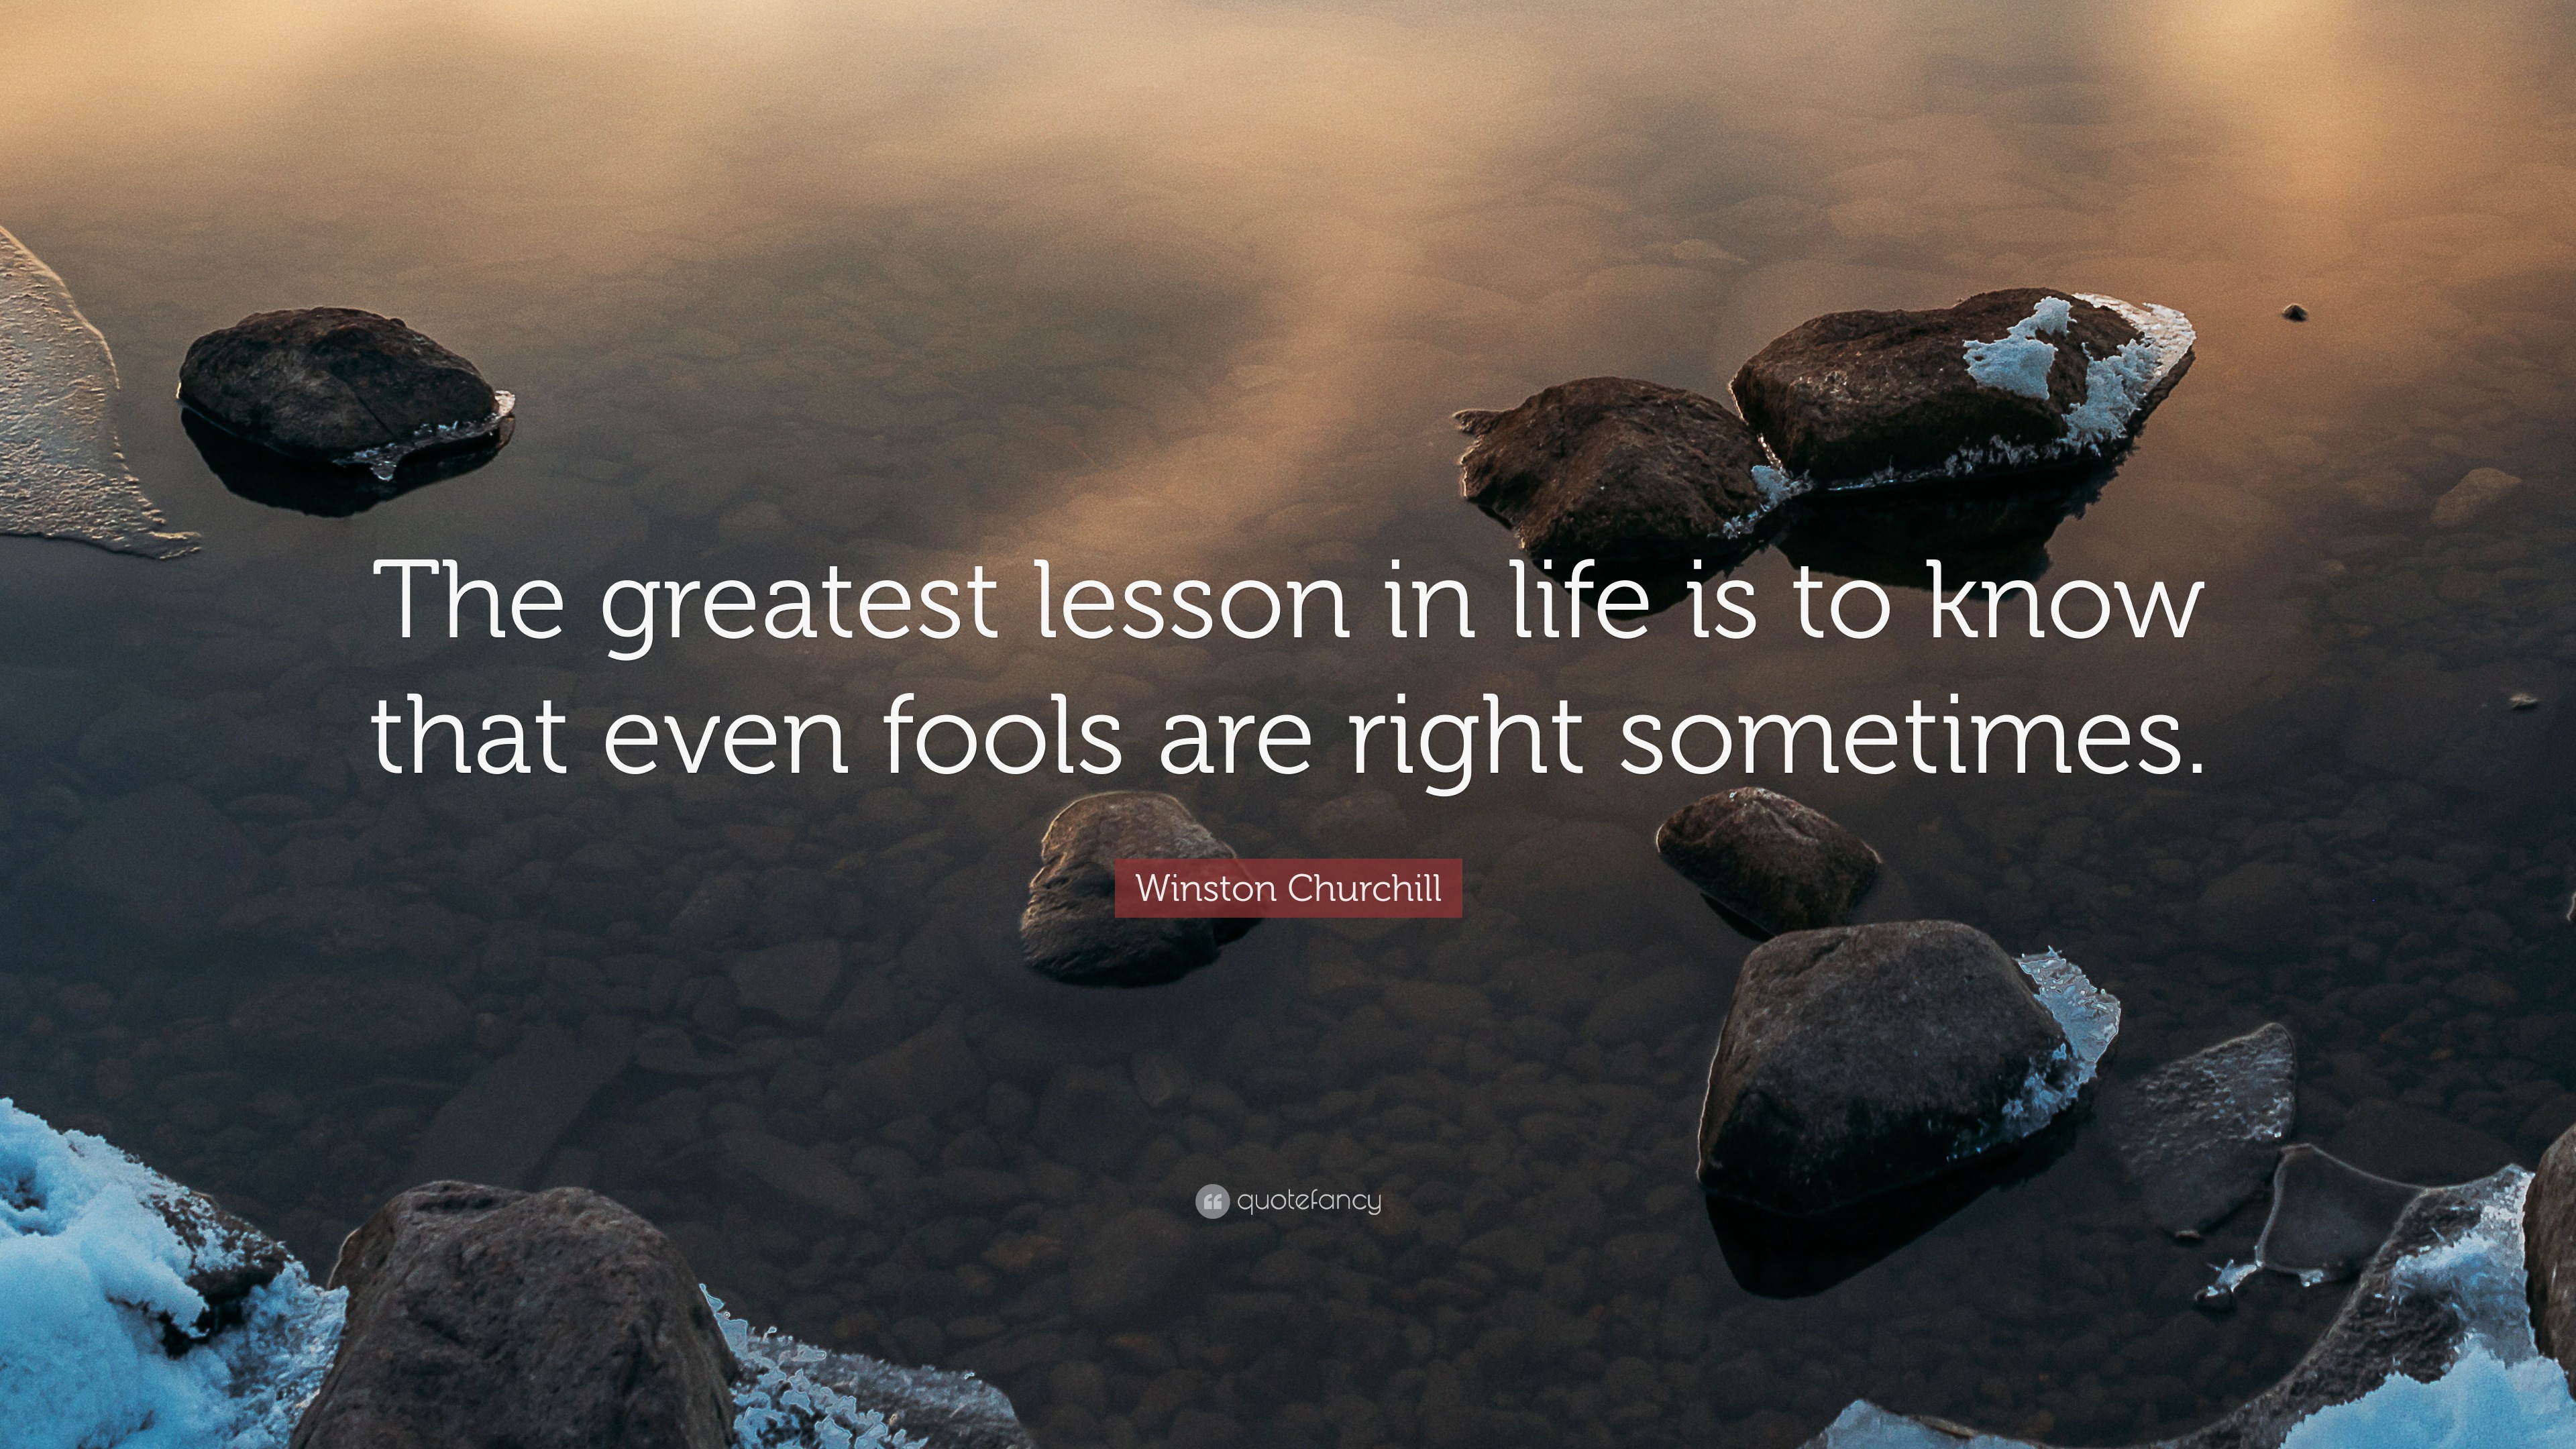 Winston Churchill Quote: “The greatest lesson in life is to know that even  fools are right